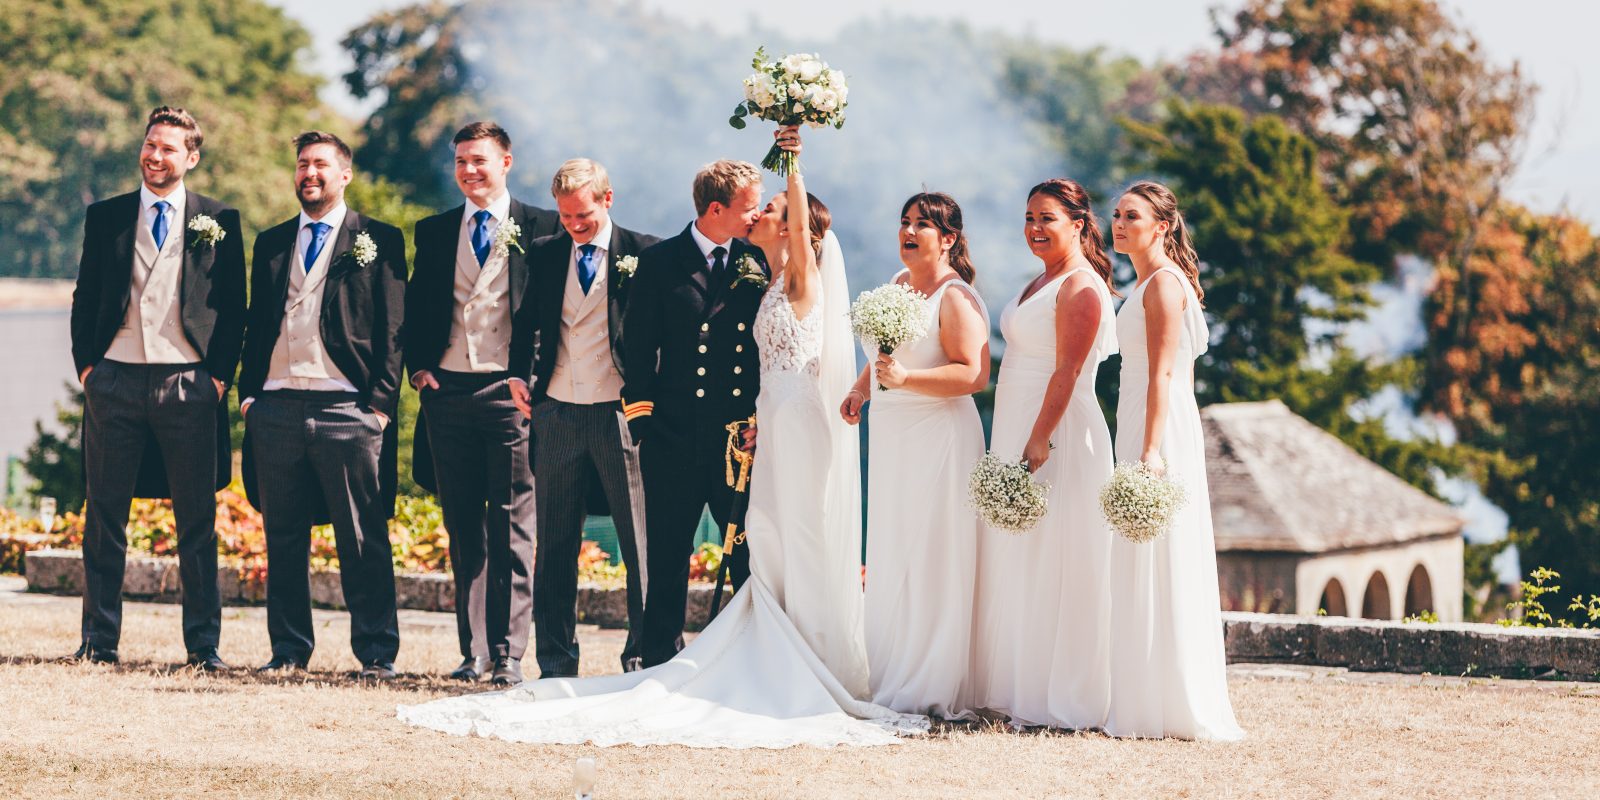 Bride and groom kissing on top lawn with bridesmaids and groomsmen in a line